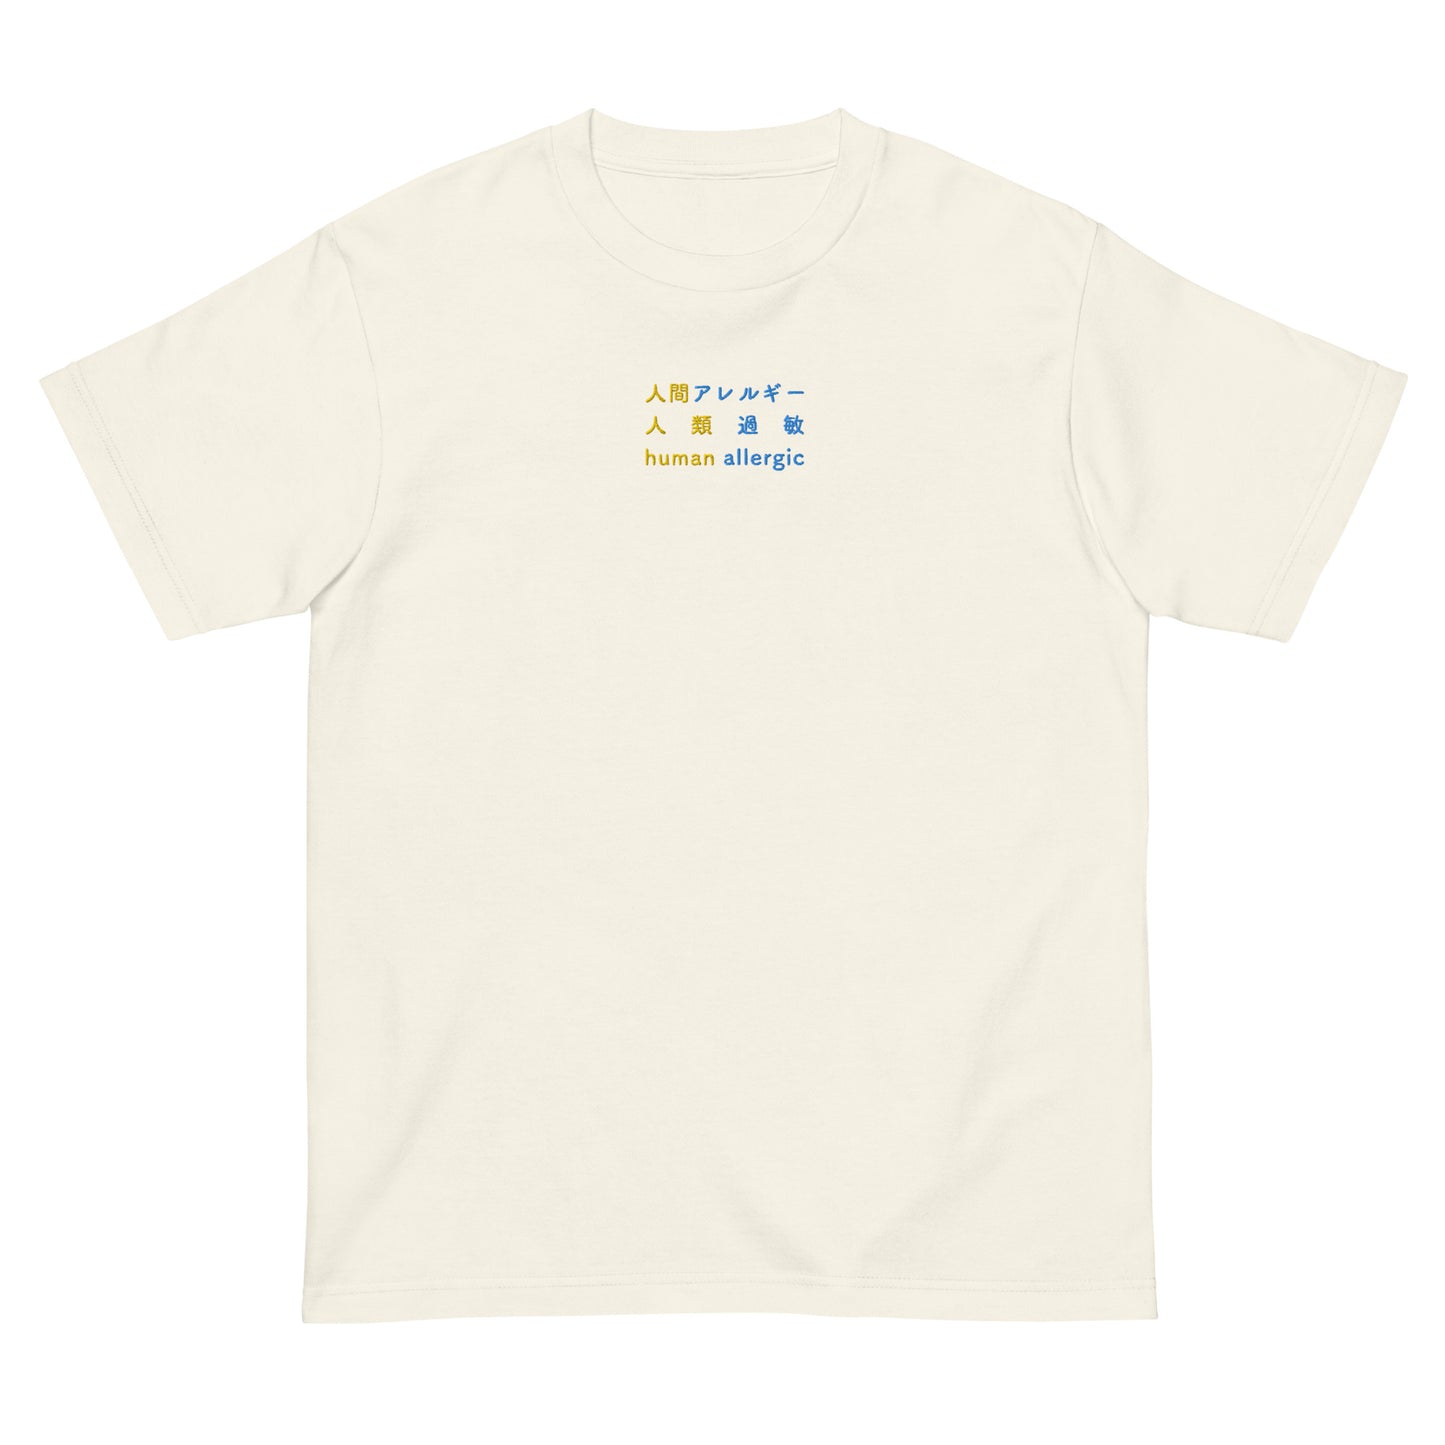 Ivory High Quality Tee - Front Design with an Yellow, Blue Embroidery "Human Allergic" in Japanese,Chinese and English